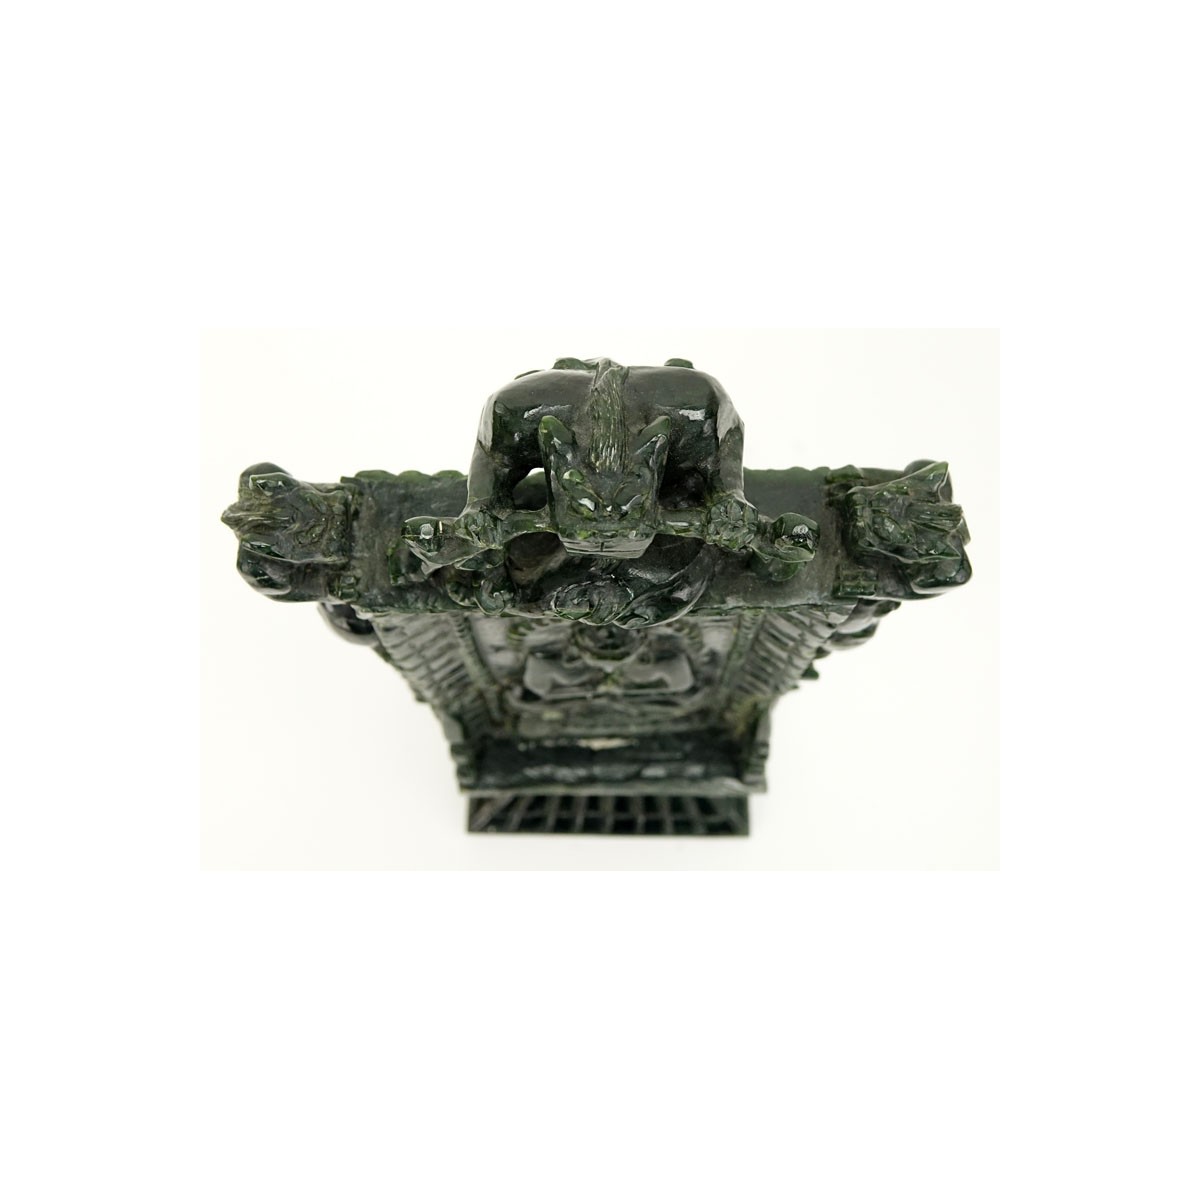 Early 20th Century Chinese Carved Dark Green Jade Ceremonial Plaque. Seated